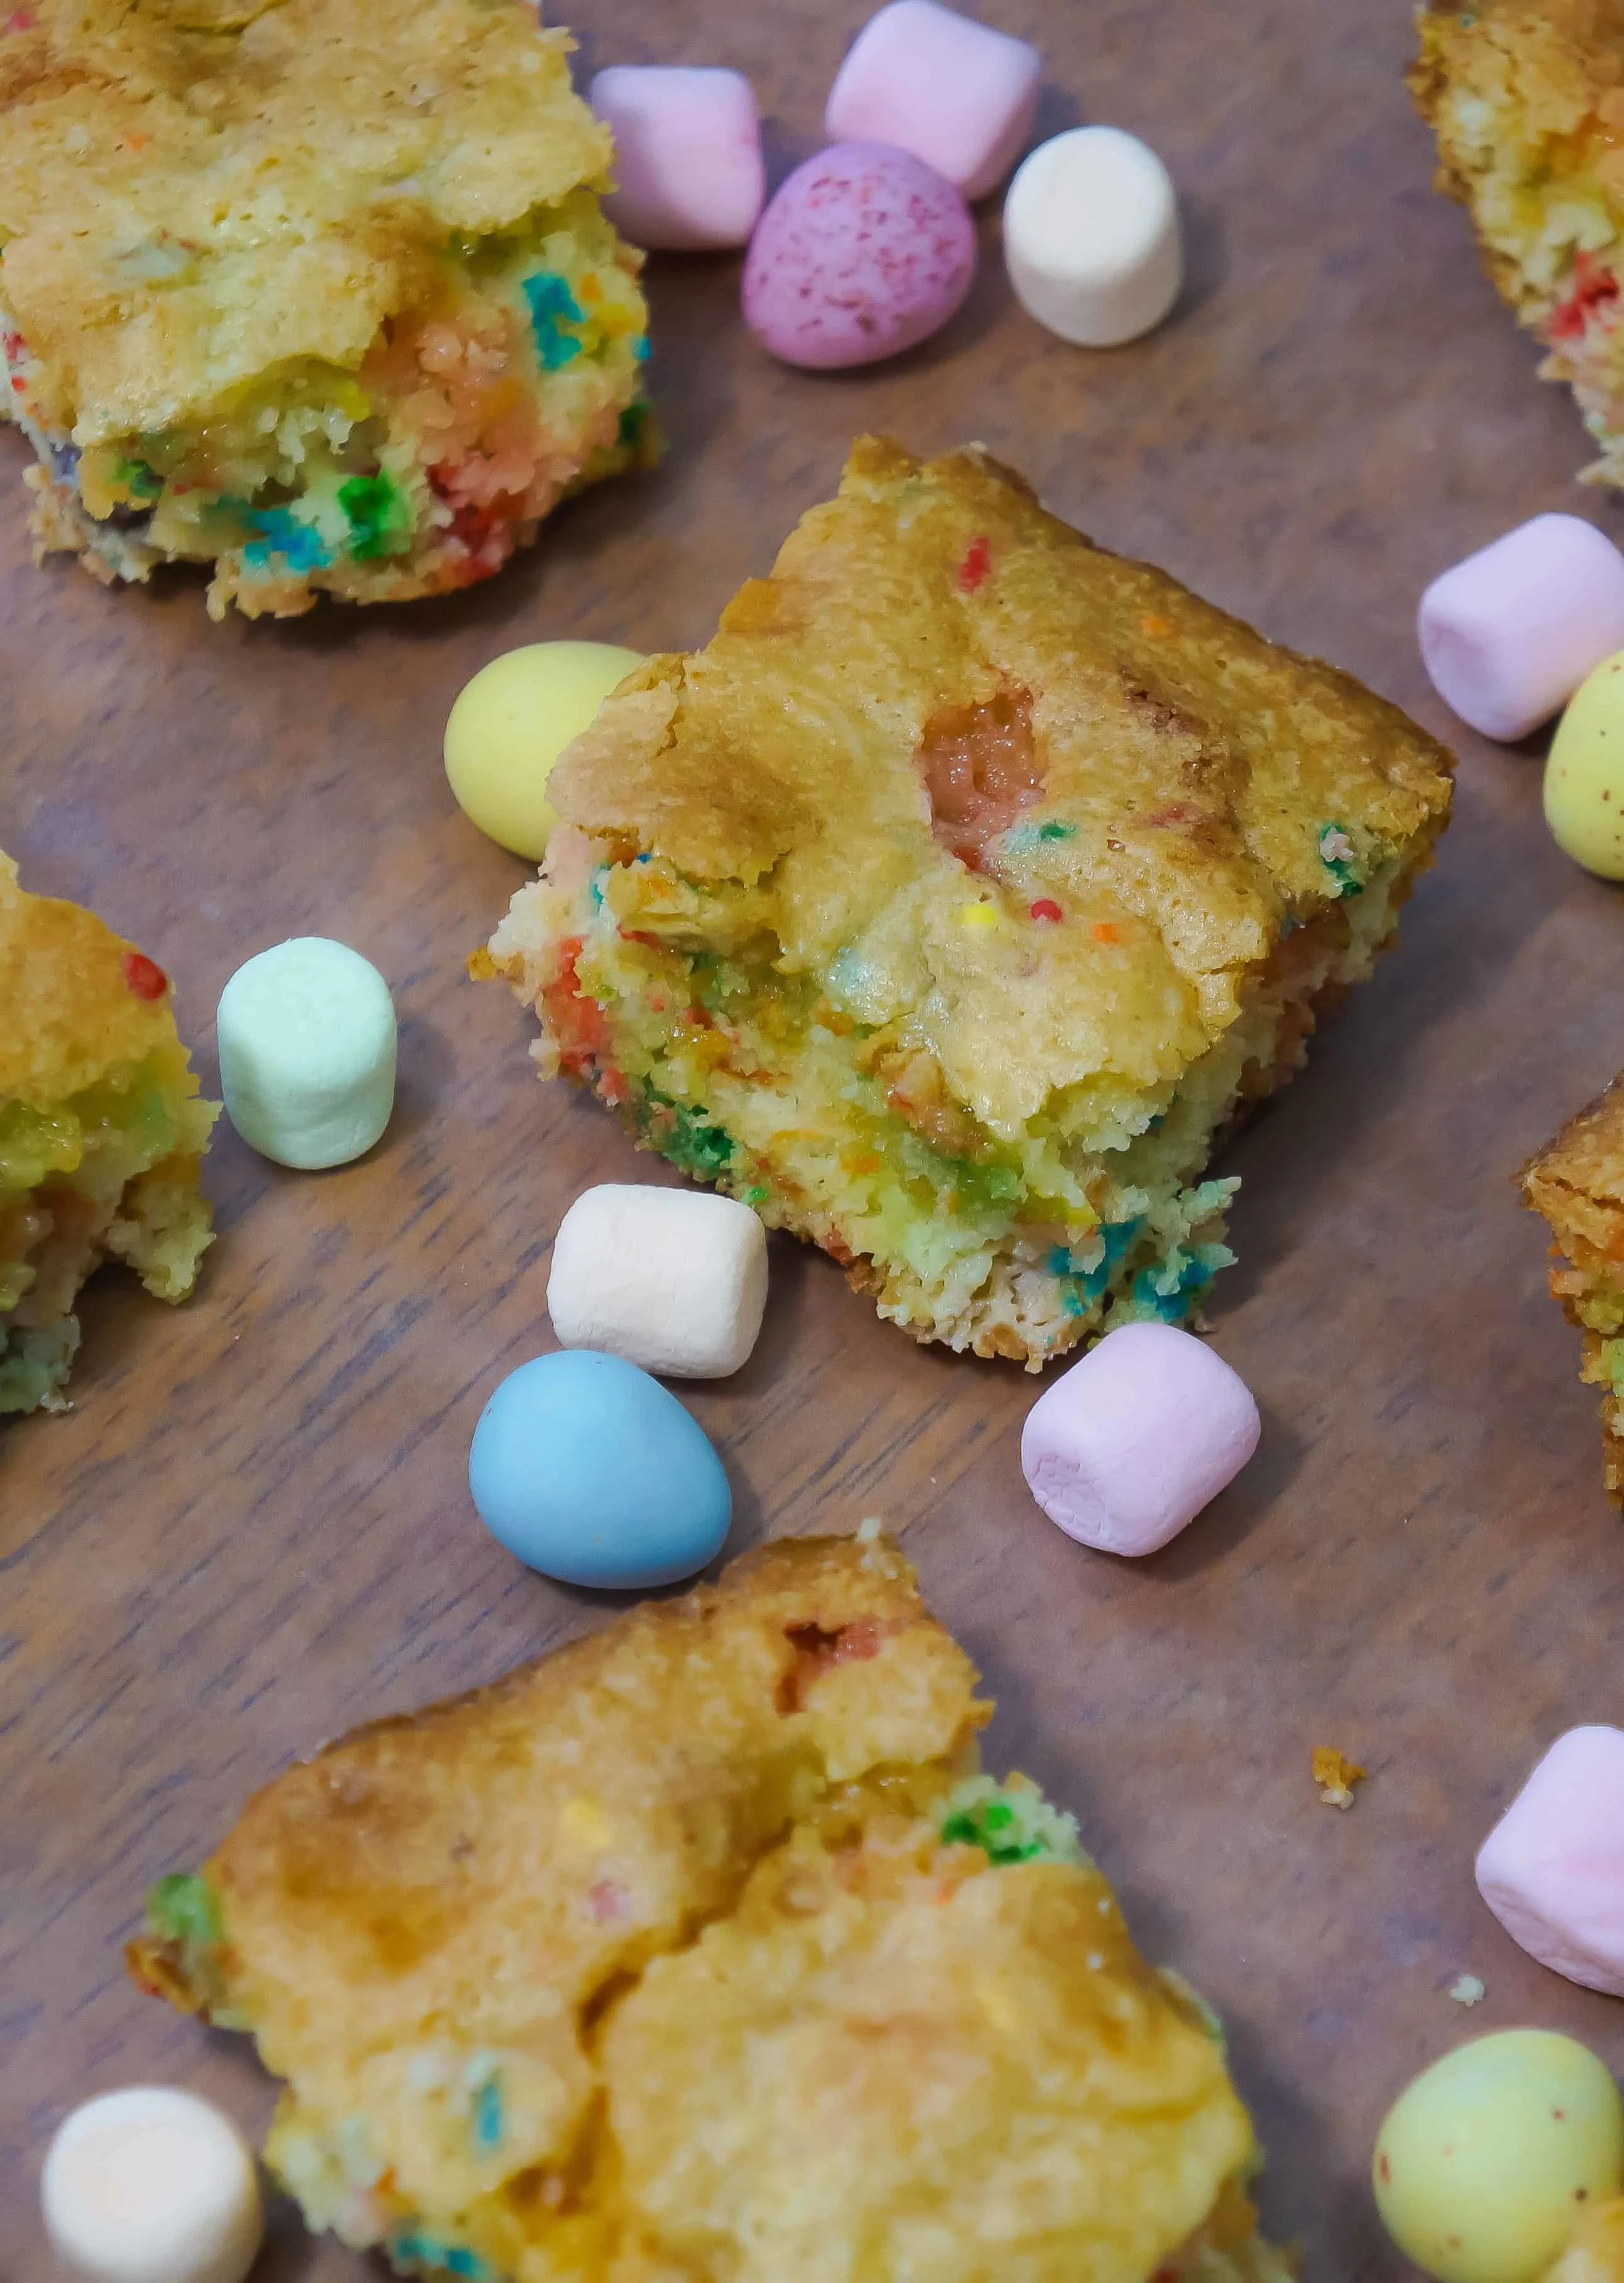 Springtime Funfetti Bars with Mini Eggs are any easy cake mix cookie bar recipe perfect for Easter. These delicious cookie bars are made with confetti cake mix and loaded with colourful mini marshmallows and mini eggs.